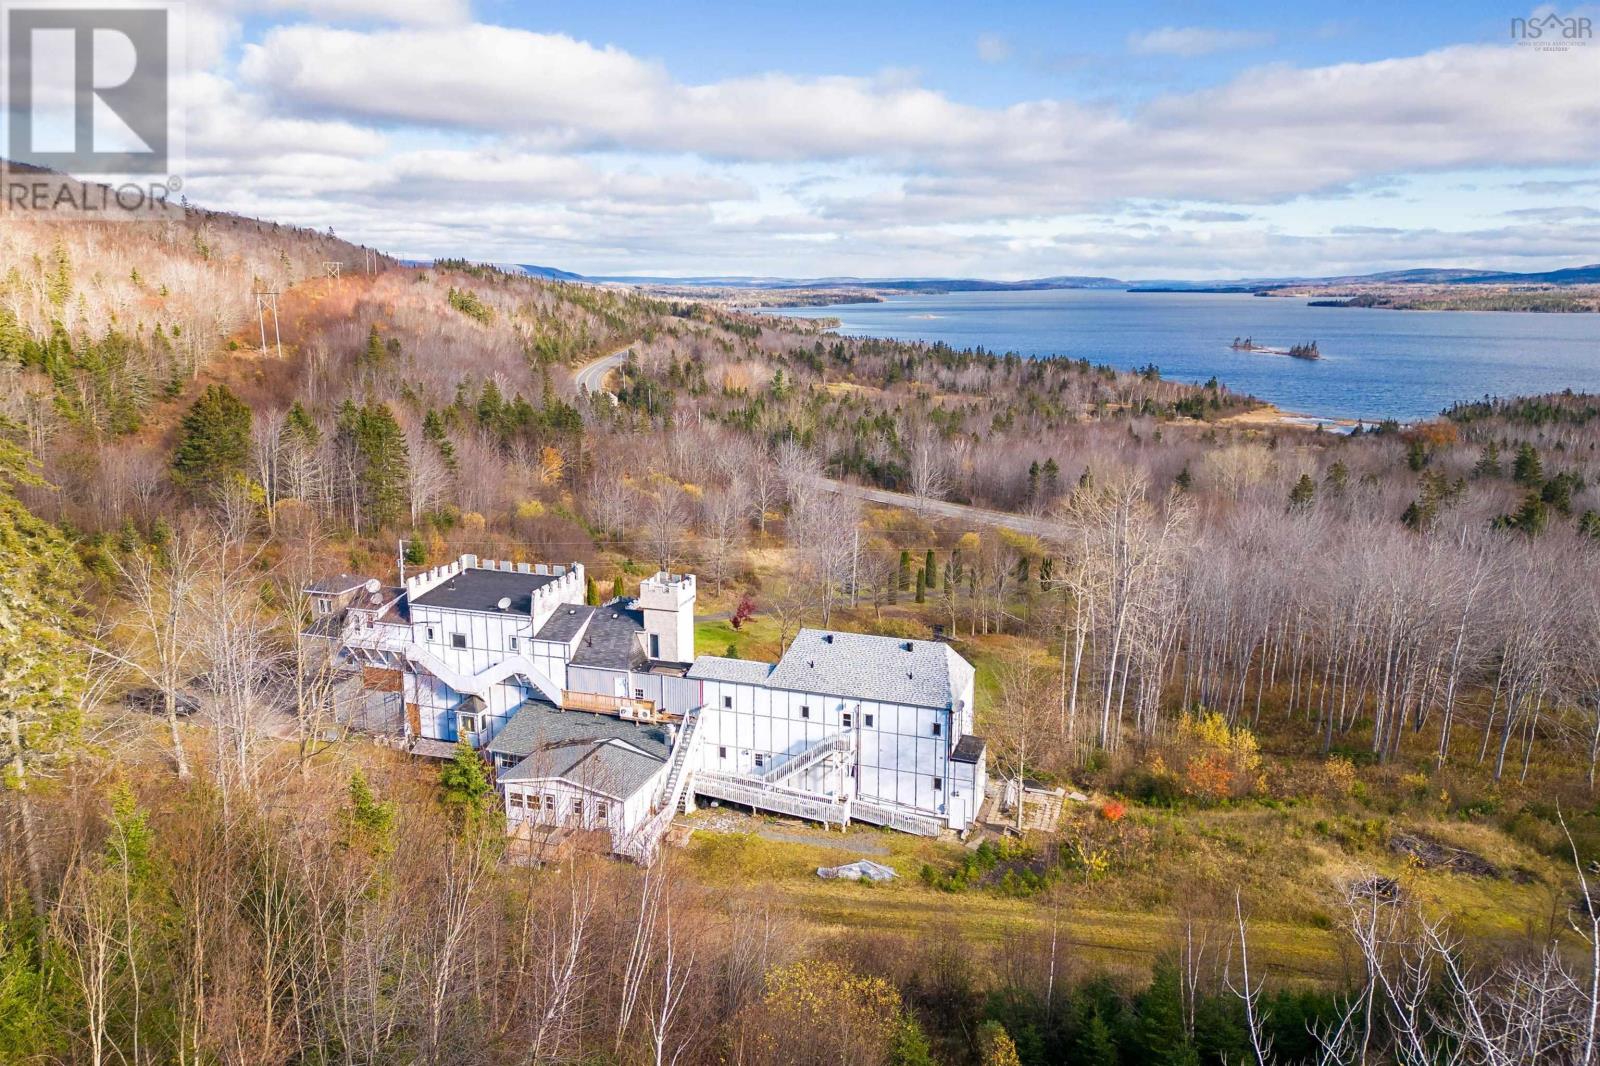 The view from the back is not as castle-like but the property (163 acres!) is in a pretty nice spot and has private access to Bras d'Or Lake. - realtor.ca